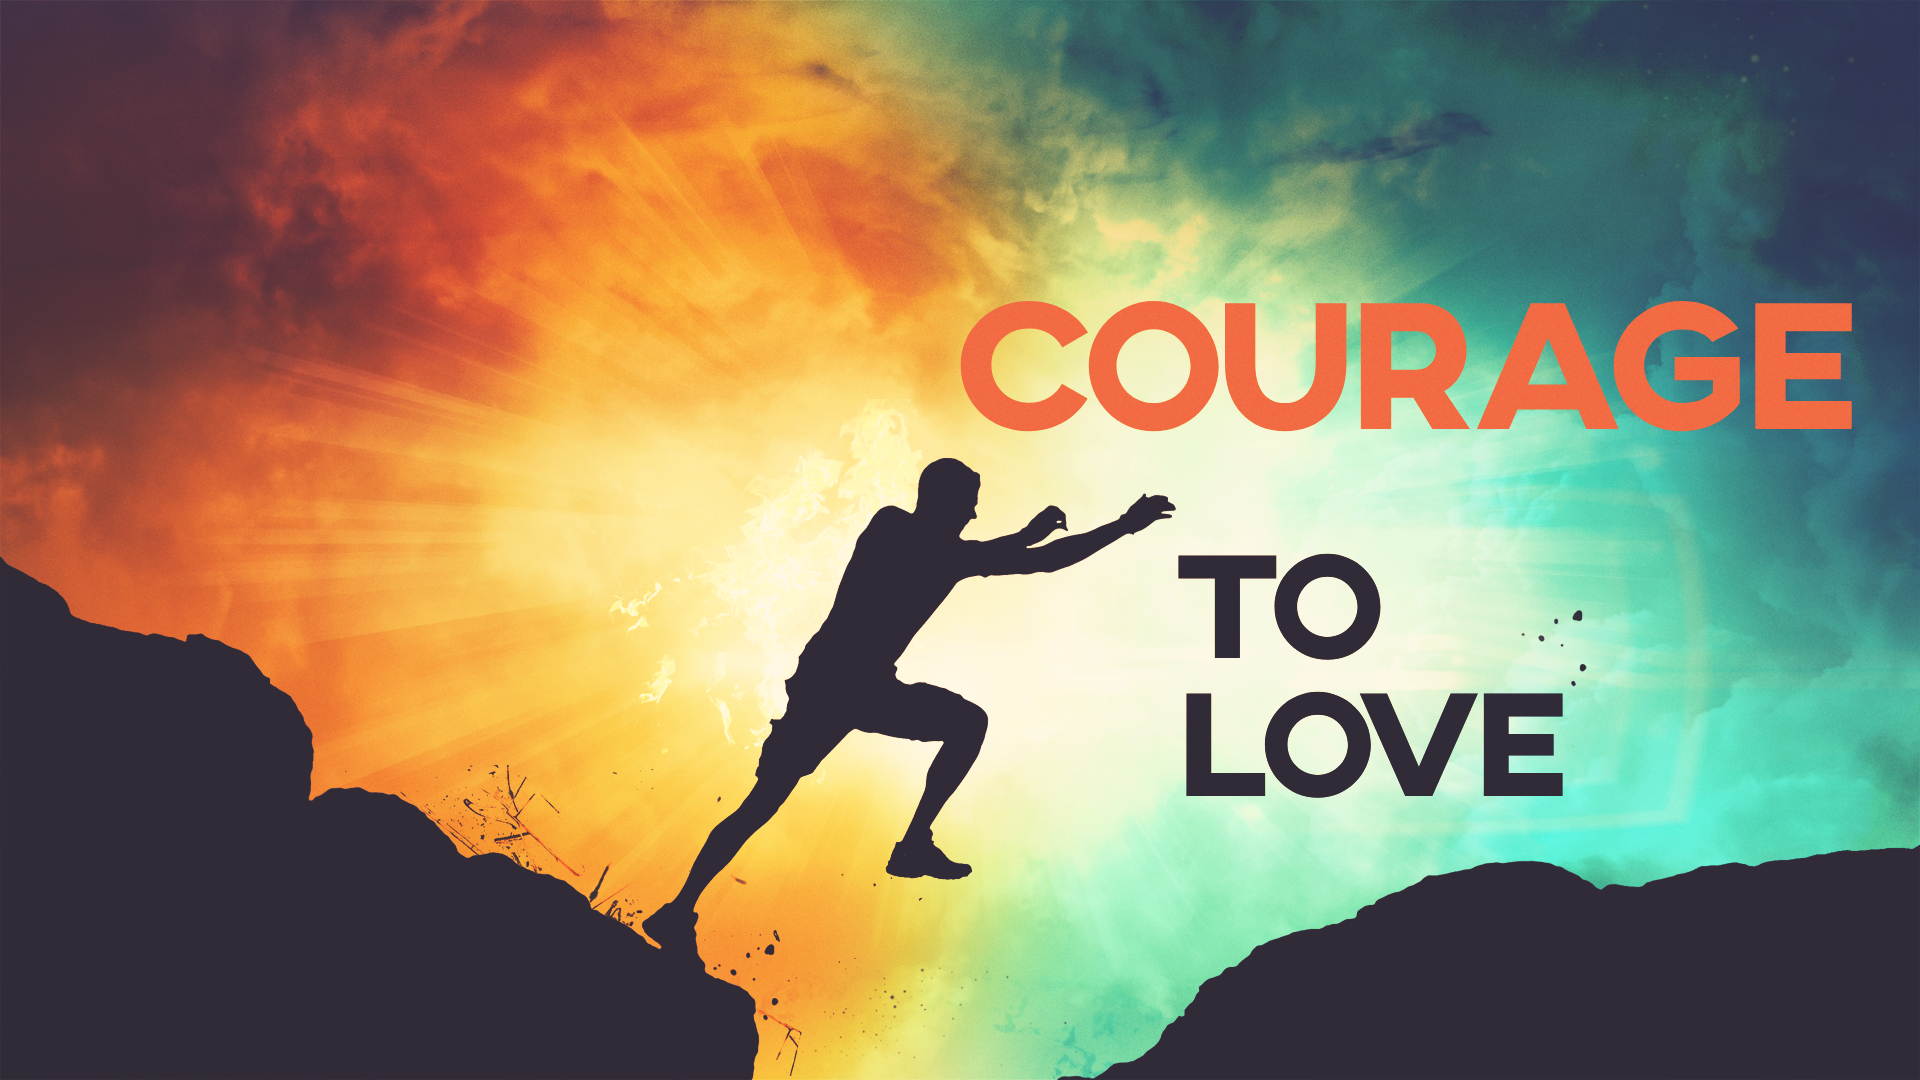 Courage to Love in Difficult Circumstances